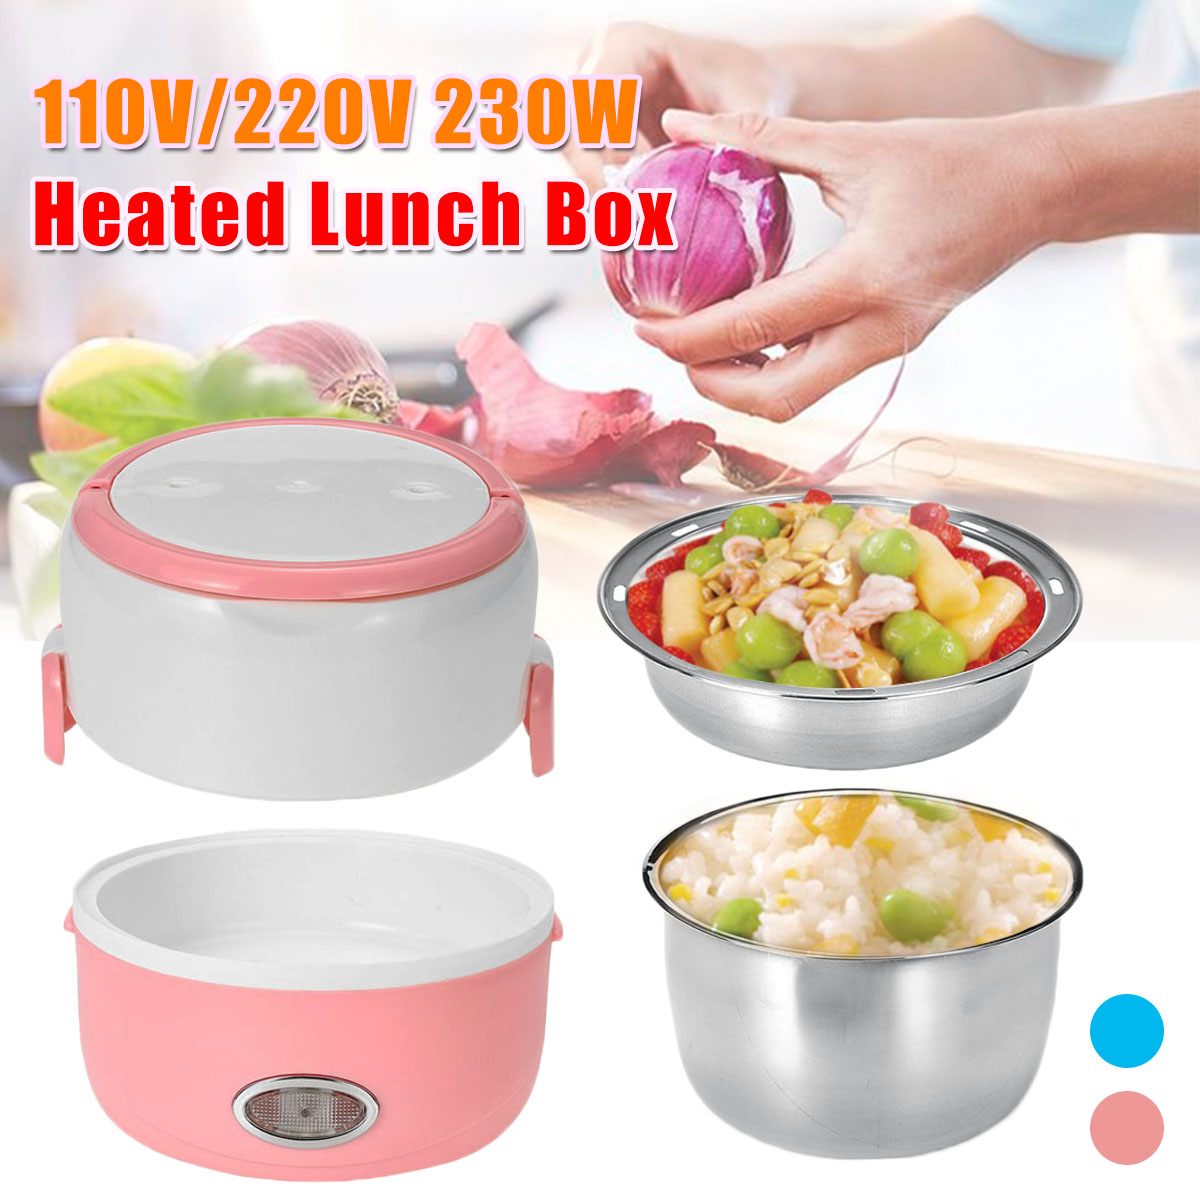 230W-13L-Portable-Electric-Stainless-Steel-Lunch-Bento-Box-Picnic-Bag-Heated-Food-Storage-Warmer-Hot-1661057-1